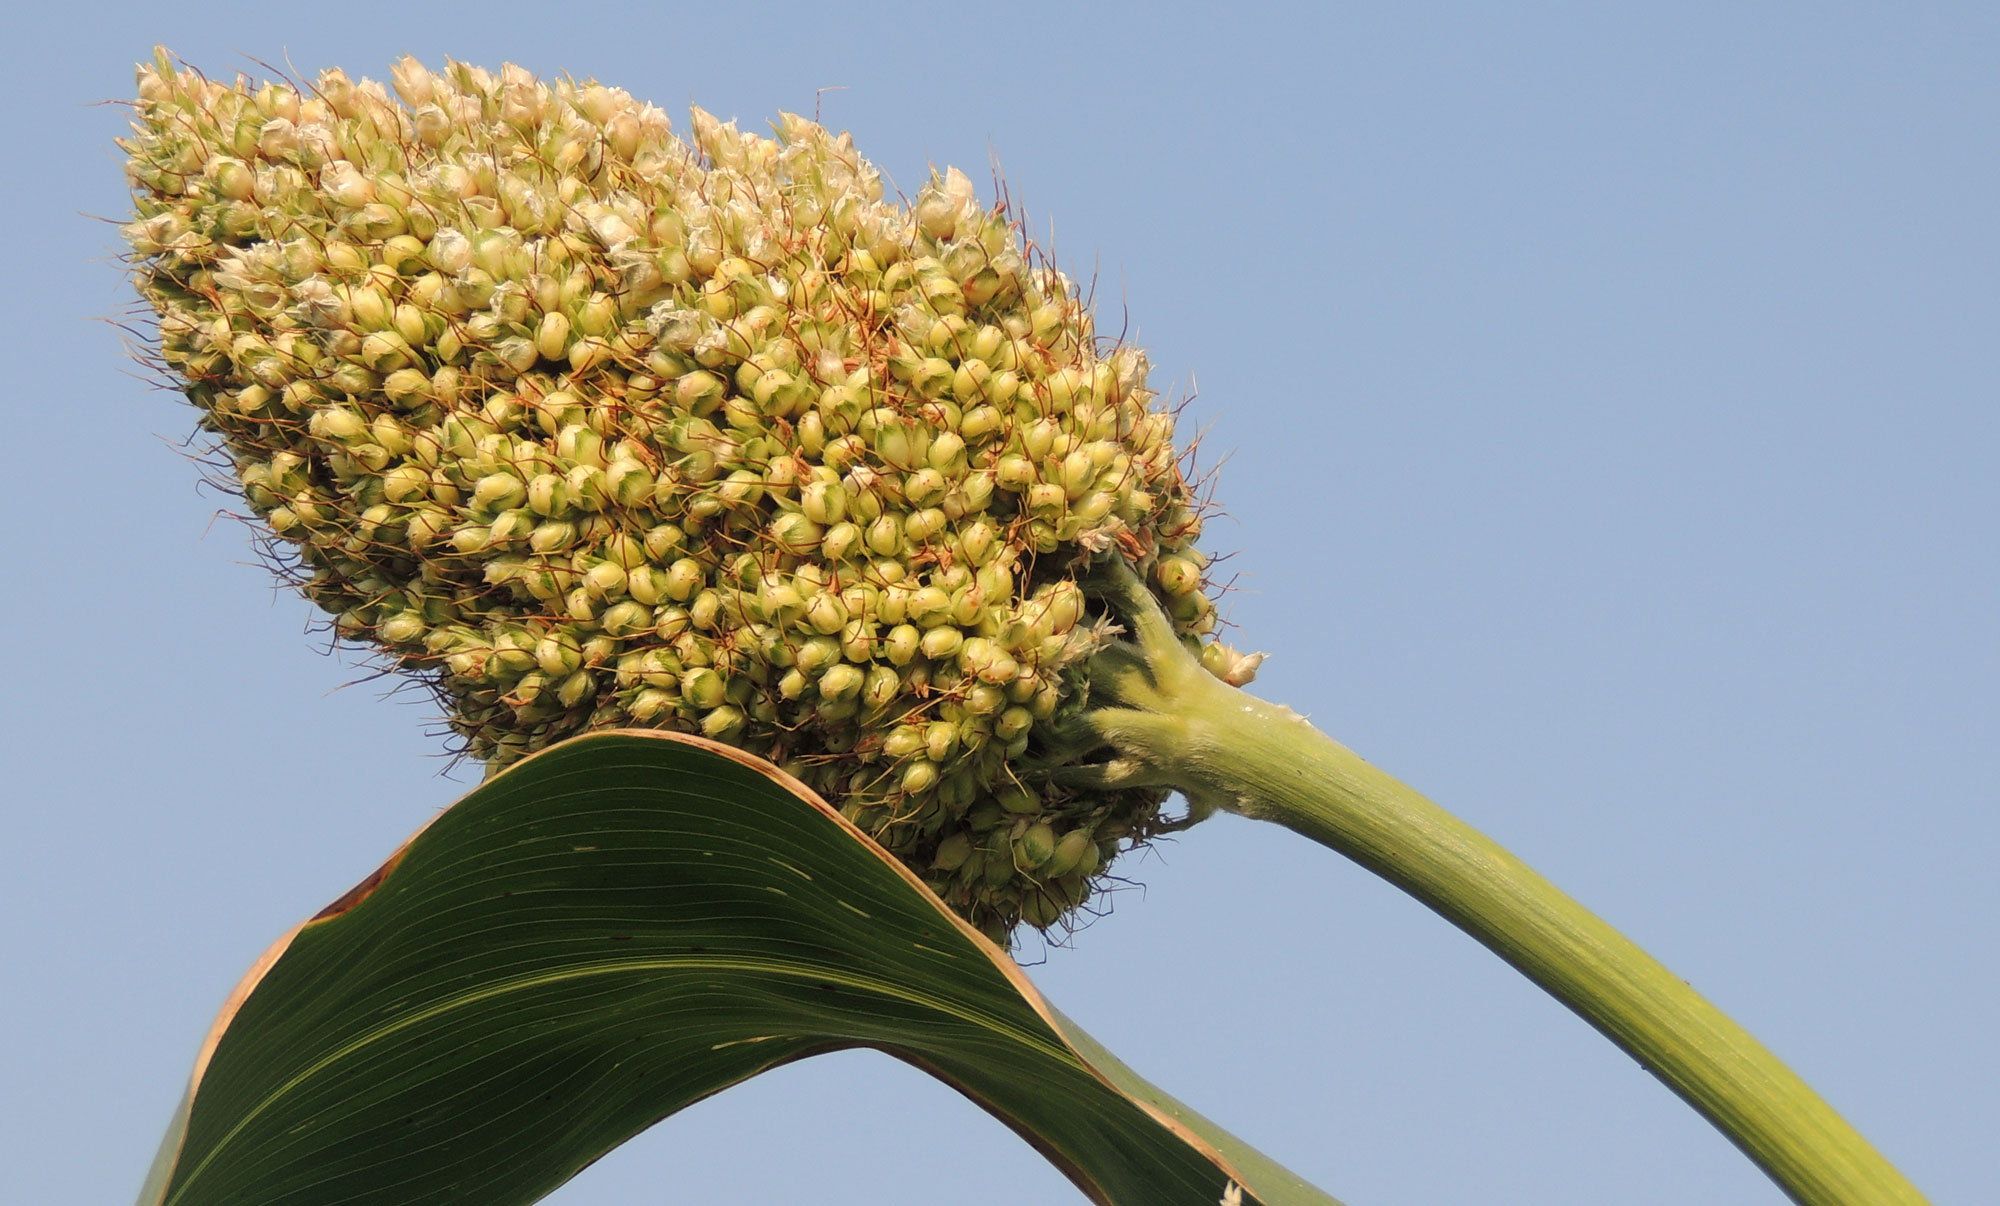 Photograph of the head of a sorghum plant with grain. The photo shows a large ovate head bearing small, greenish-white grains.